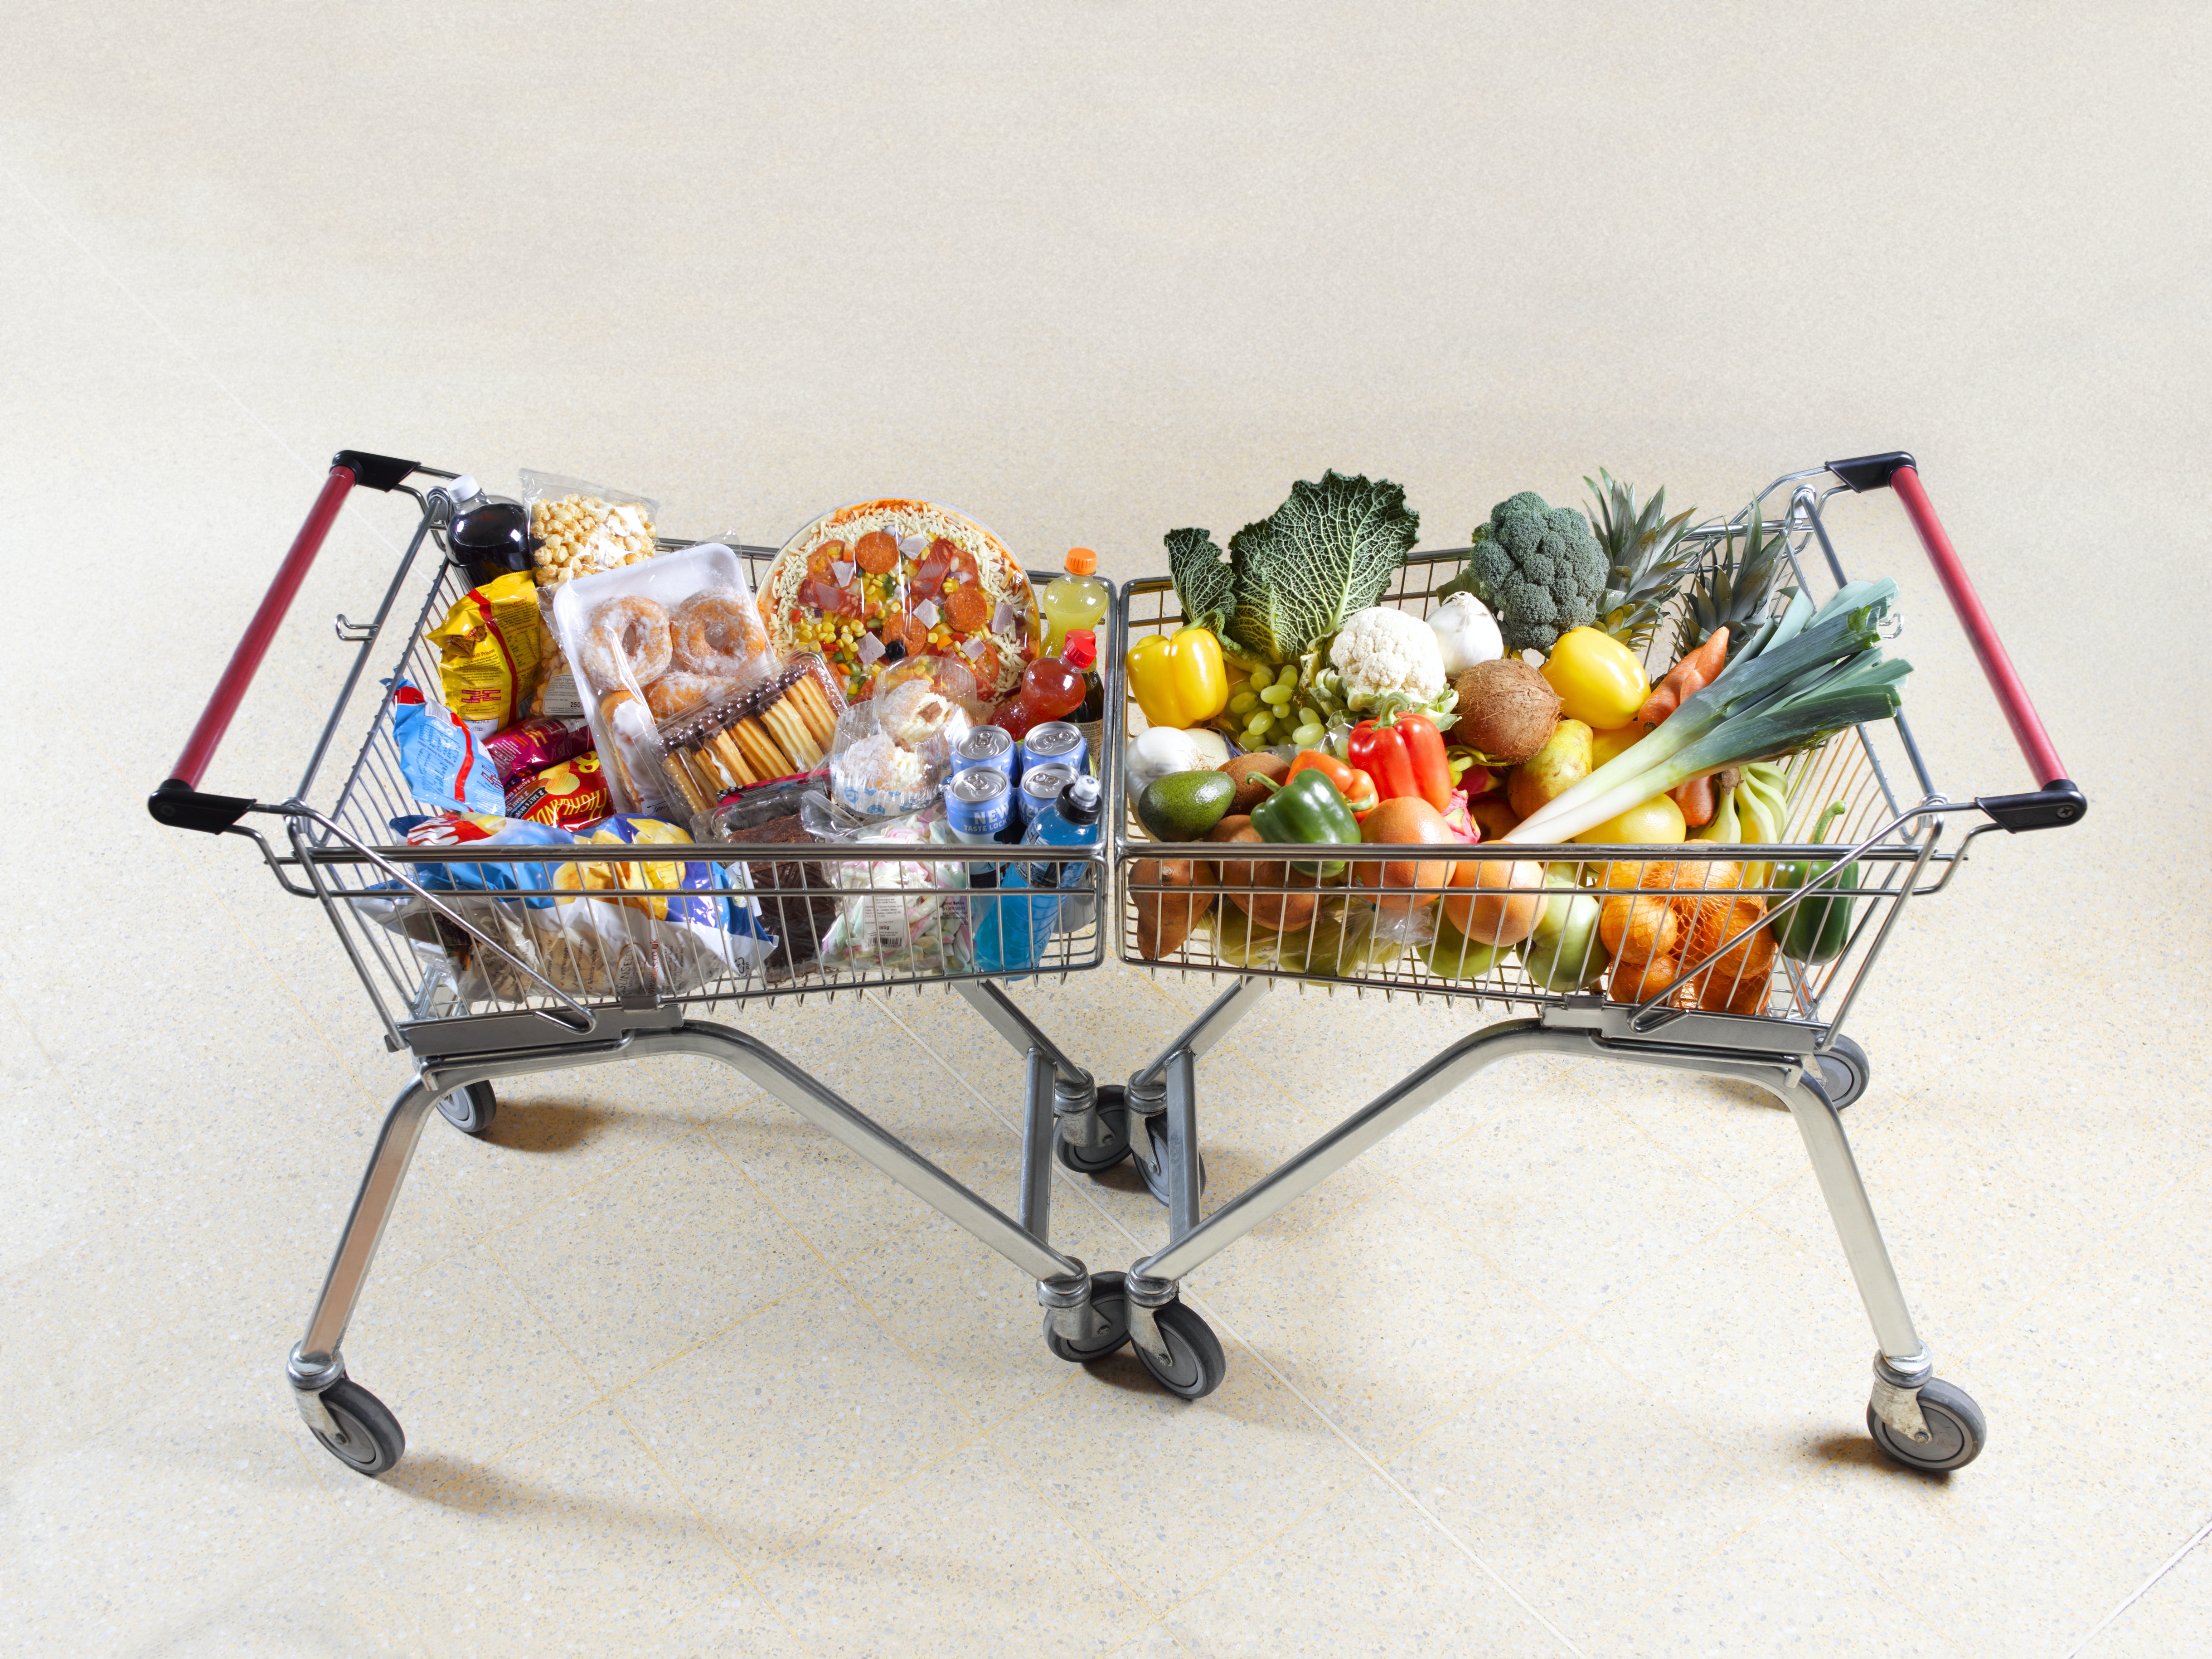 Two shopping carts lined up, one filled with fruits and vegetables, the other with sweets and high-fat foods.